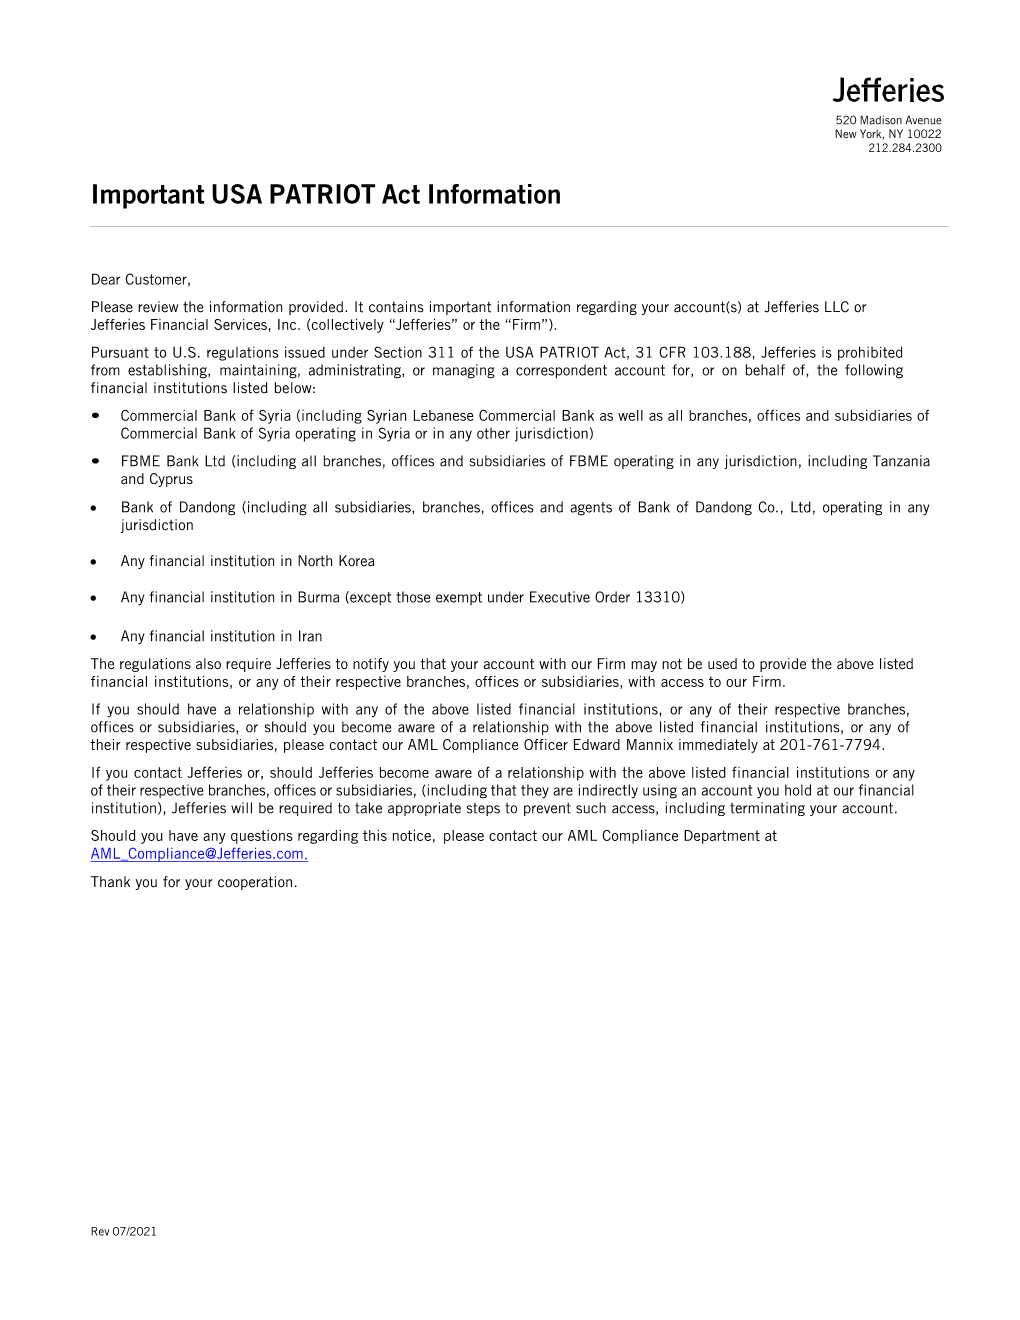 Important USA PATRIOT Act Information